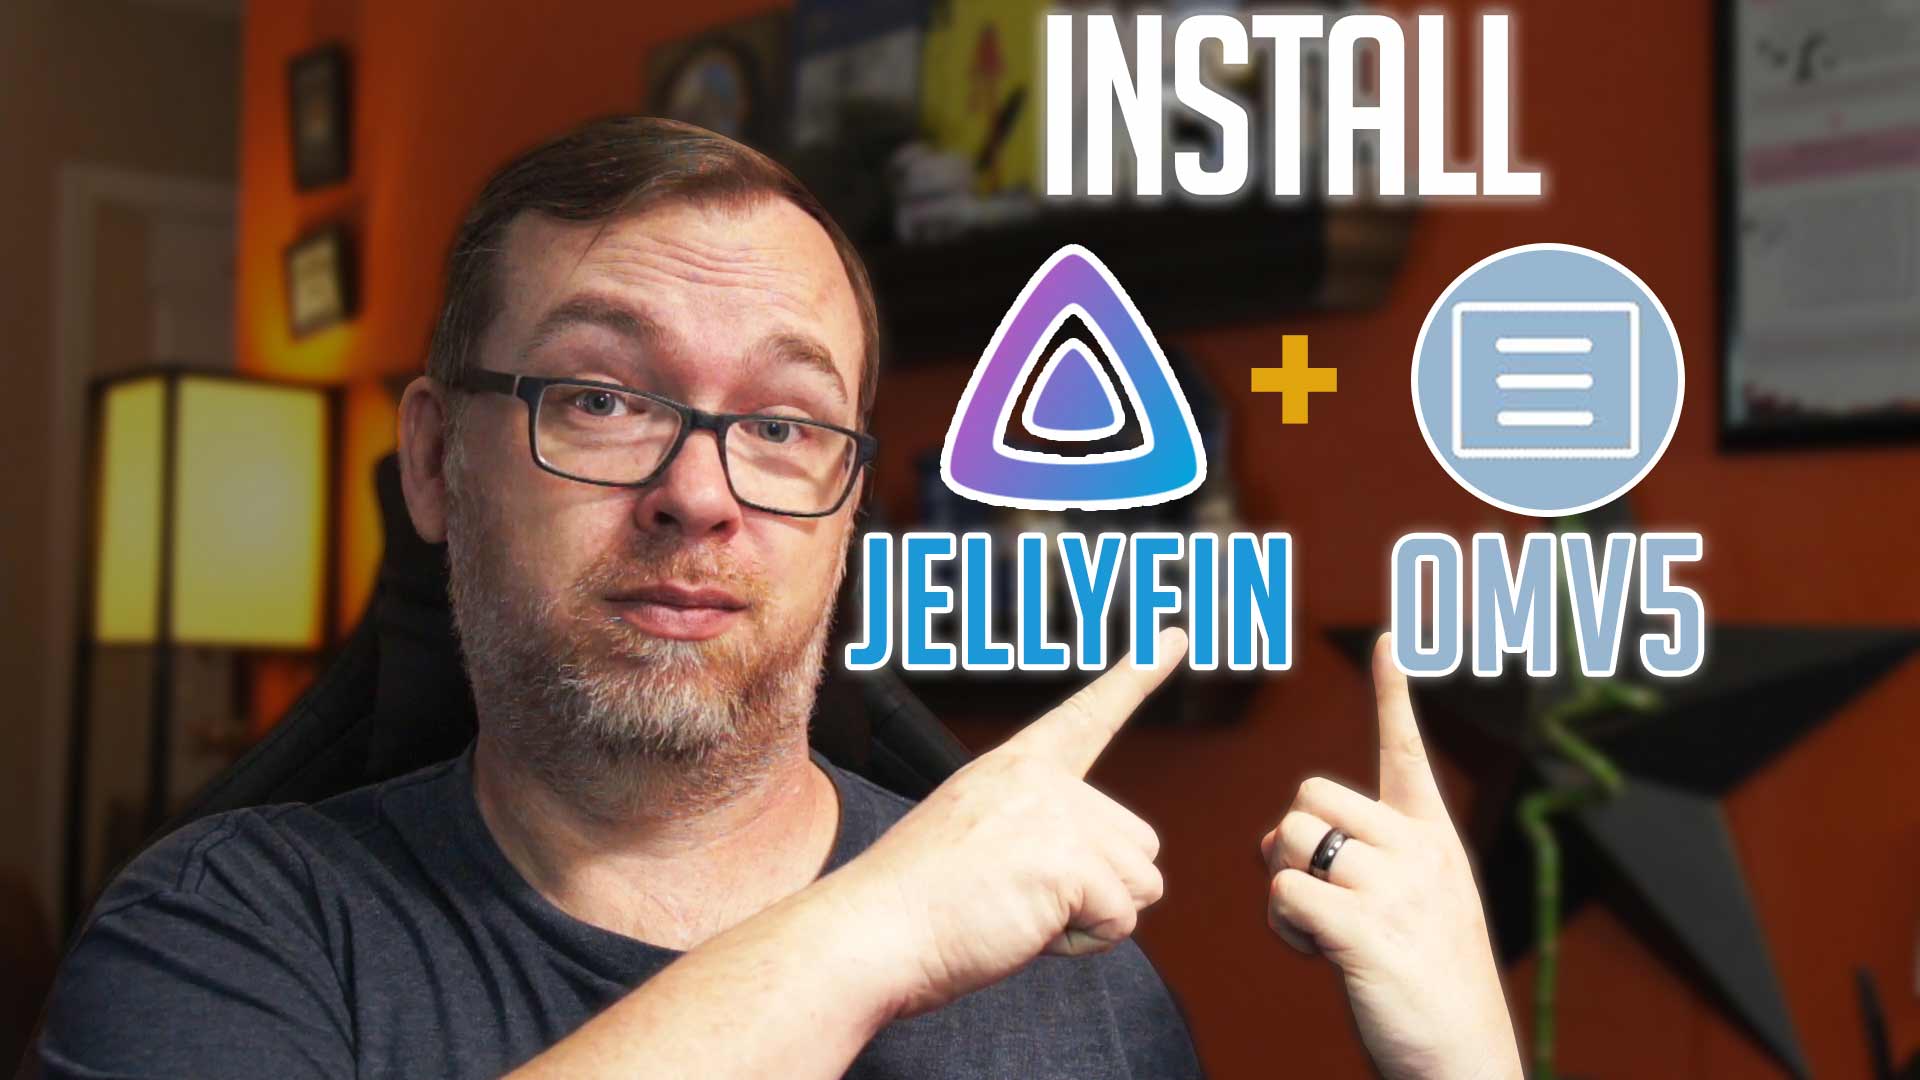 How to Install Jellyfin on OMV5